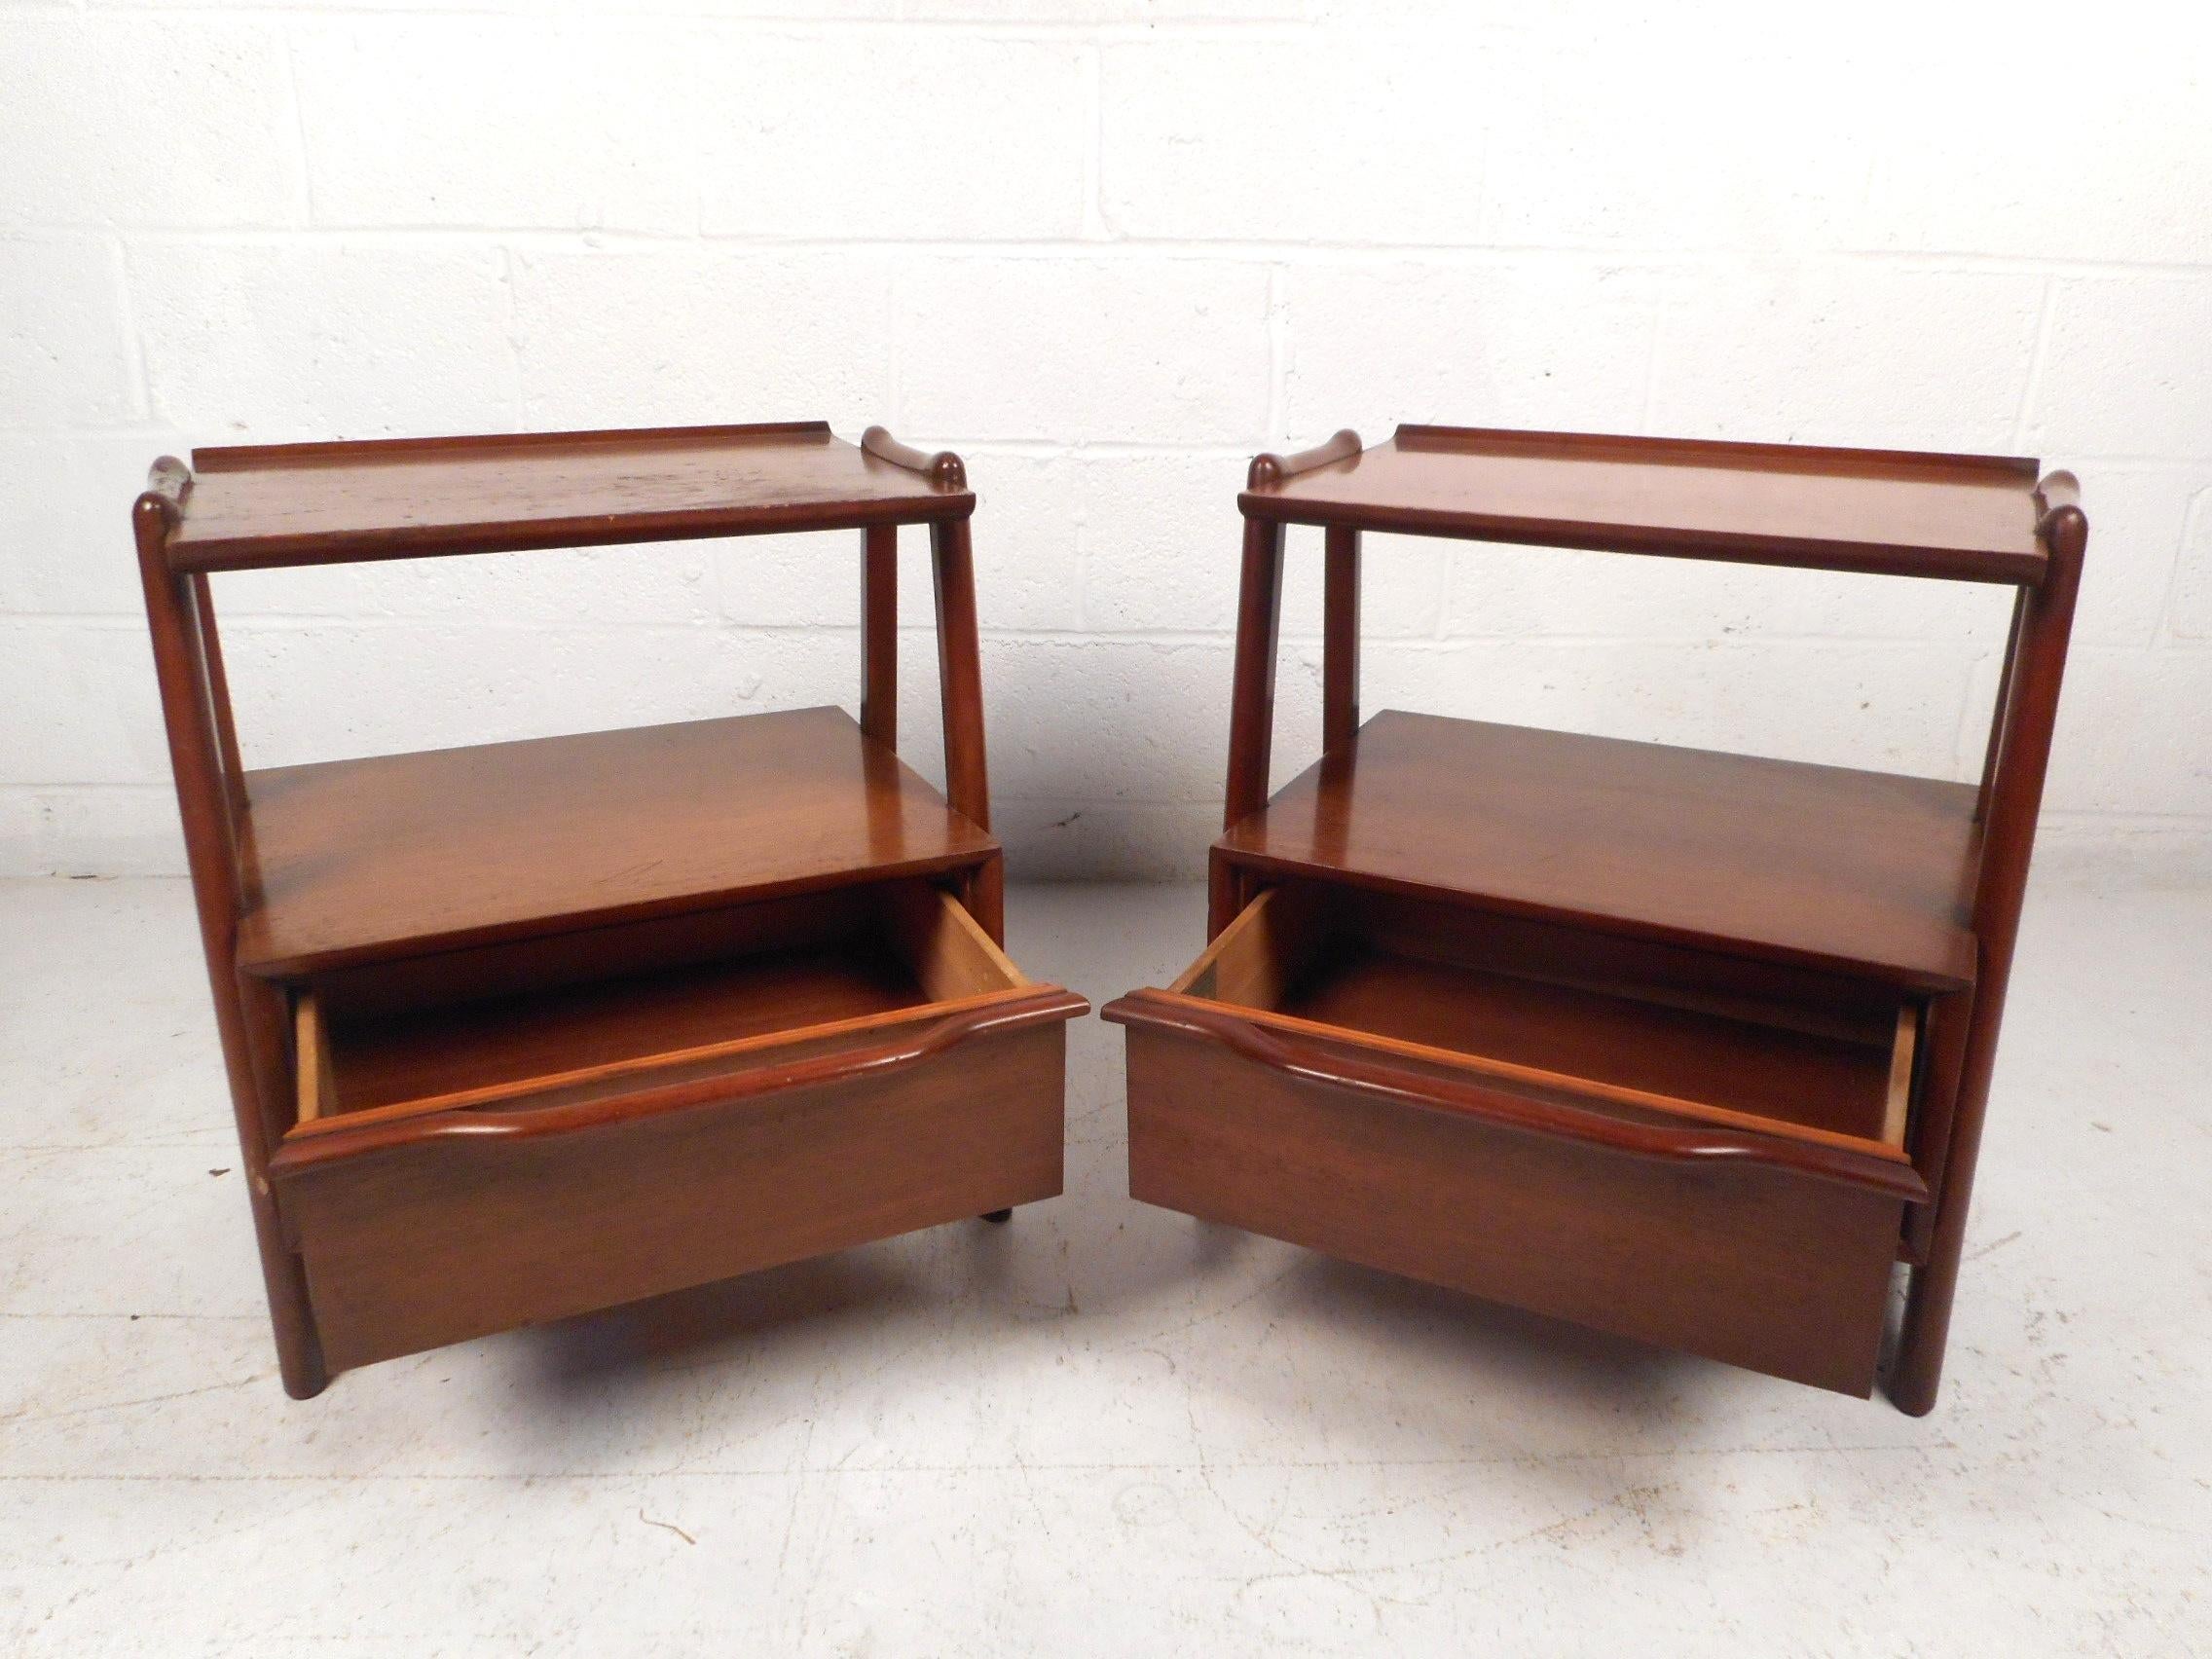 This unique pair of midcentury nightstands feature a sturdy mahogany construction certified by the Mahogany Association Inc. ensuring the authenticity of the wood. Interestingly contoured frames on either side secure the drawer's casing and offer a